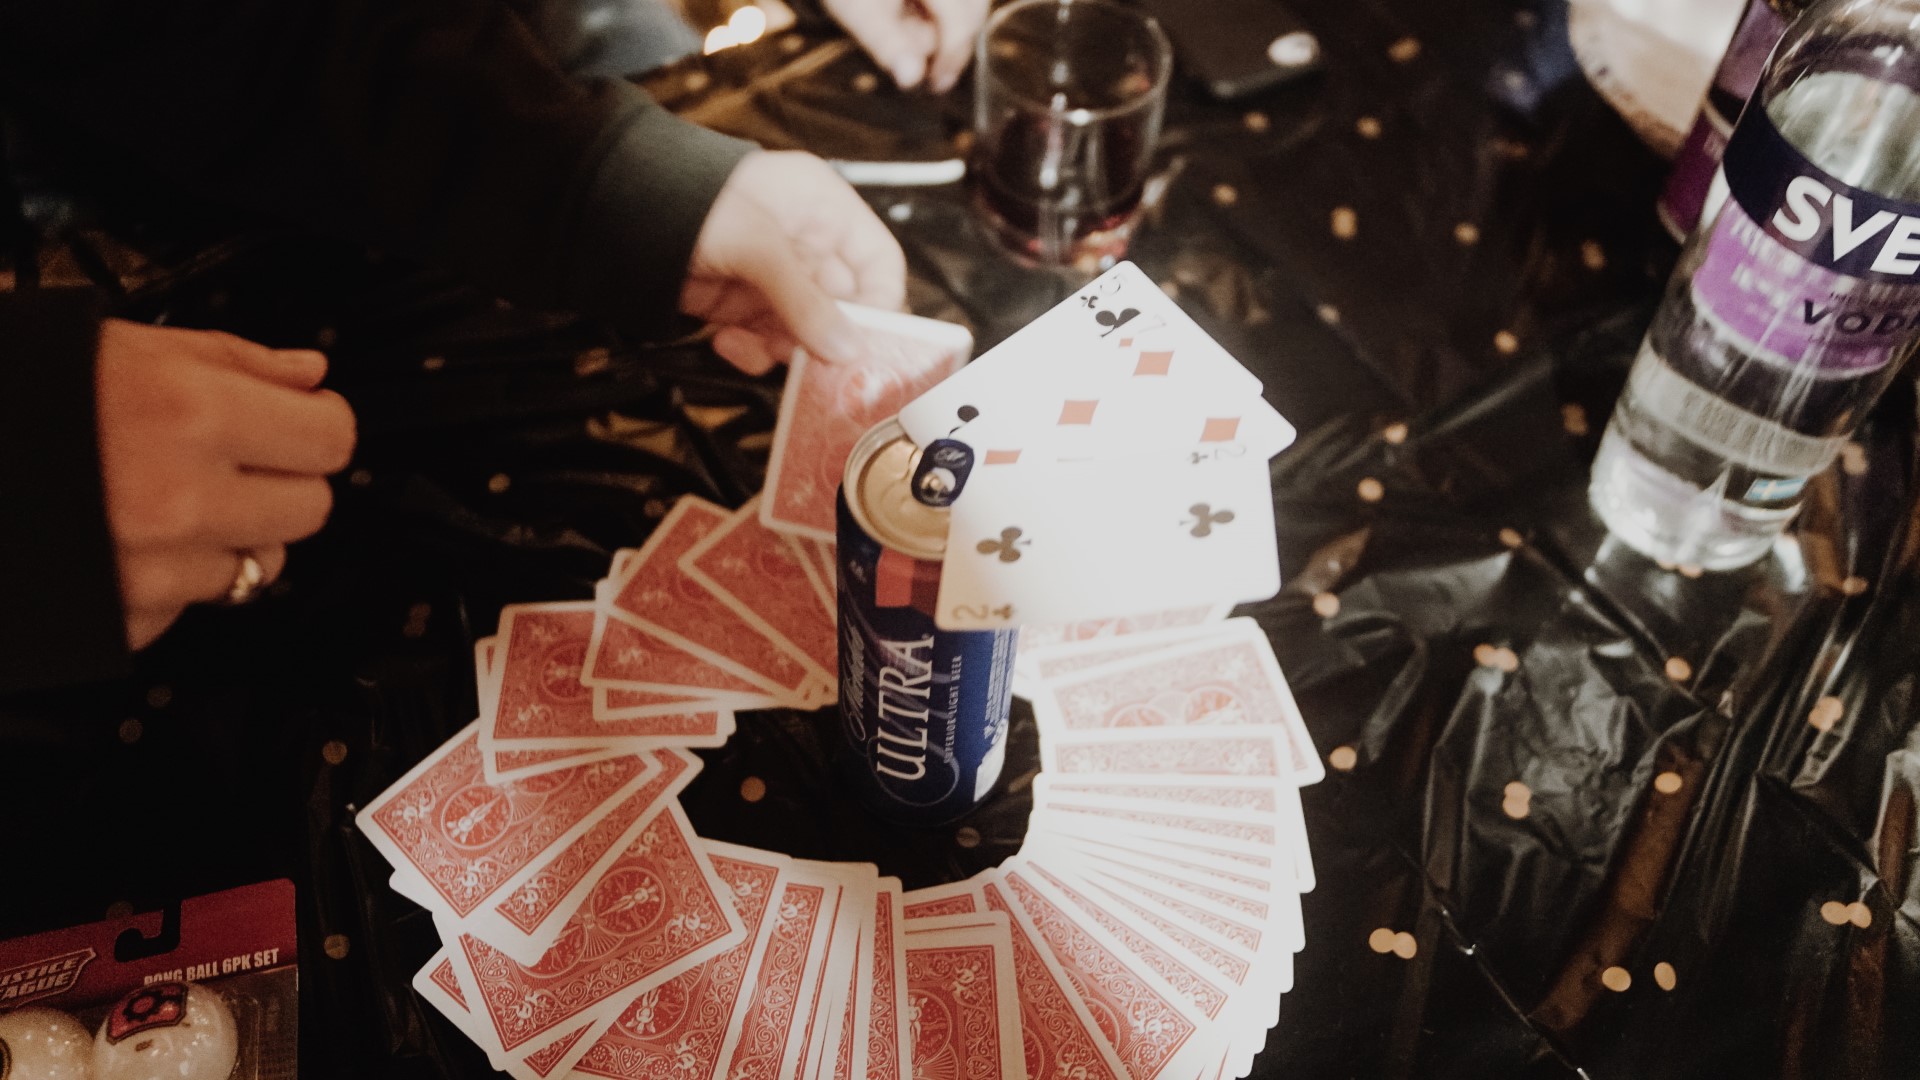 Drinking card games a game of King's cup being played, credit to Unsplash Taylor Friehl